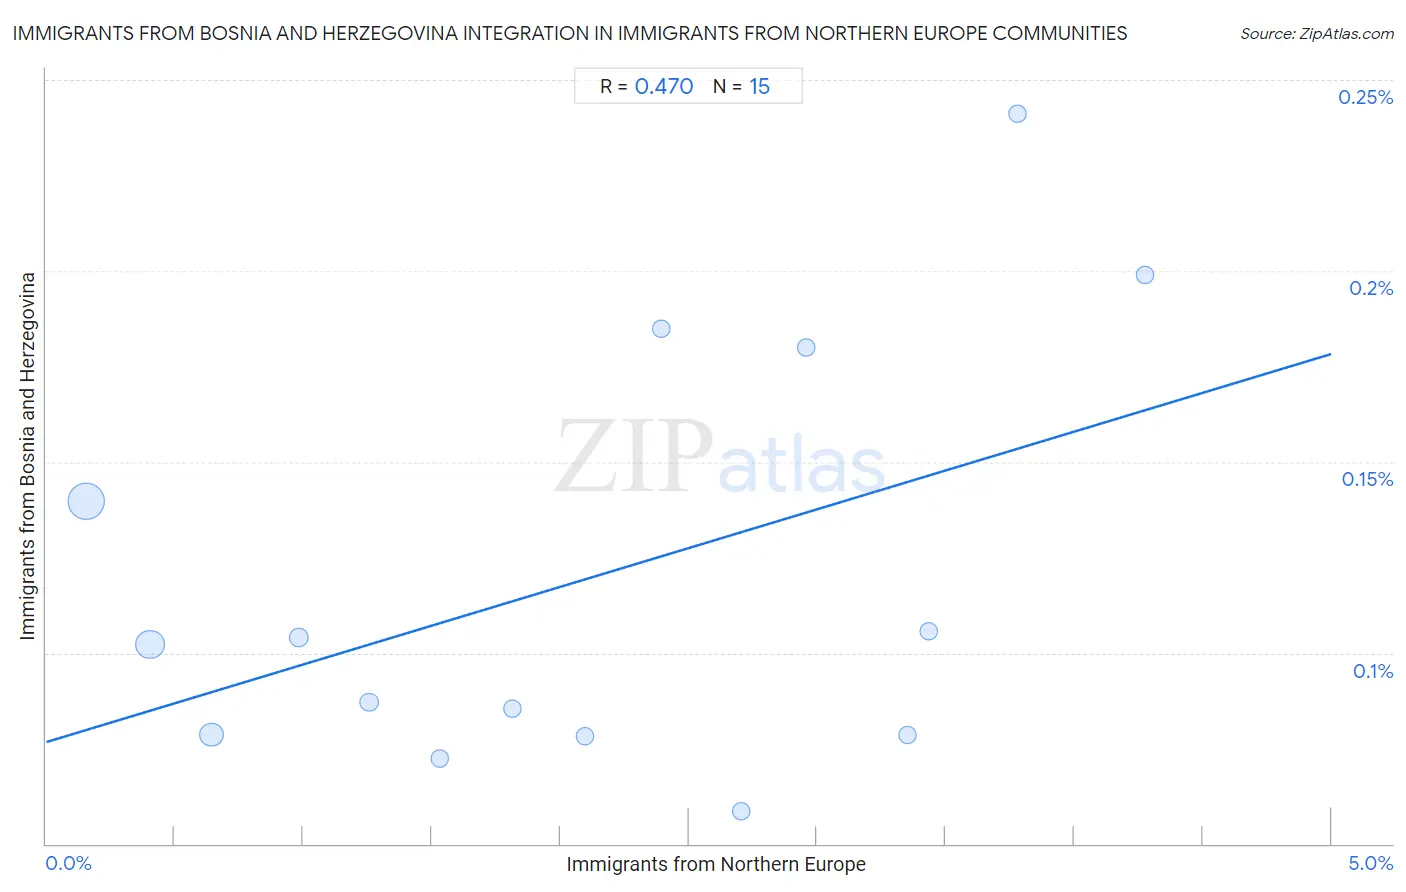 Immigrants from Northern Europe Integration in Immigrants from Bosnia and Herzegovina Communities